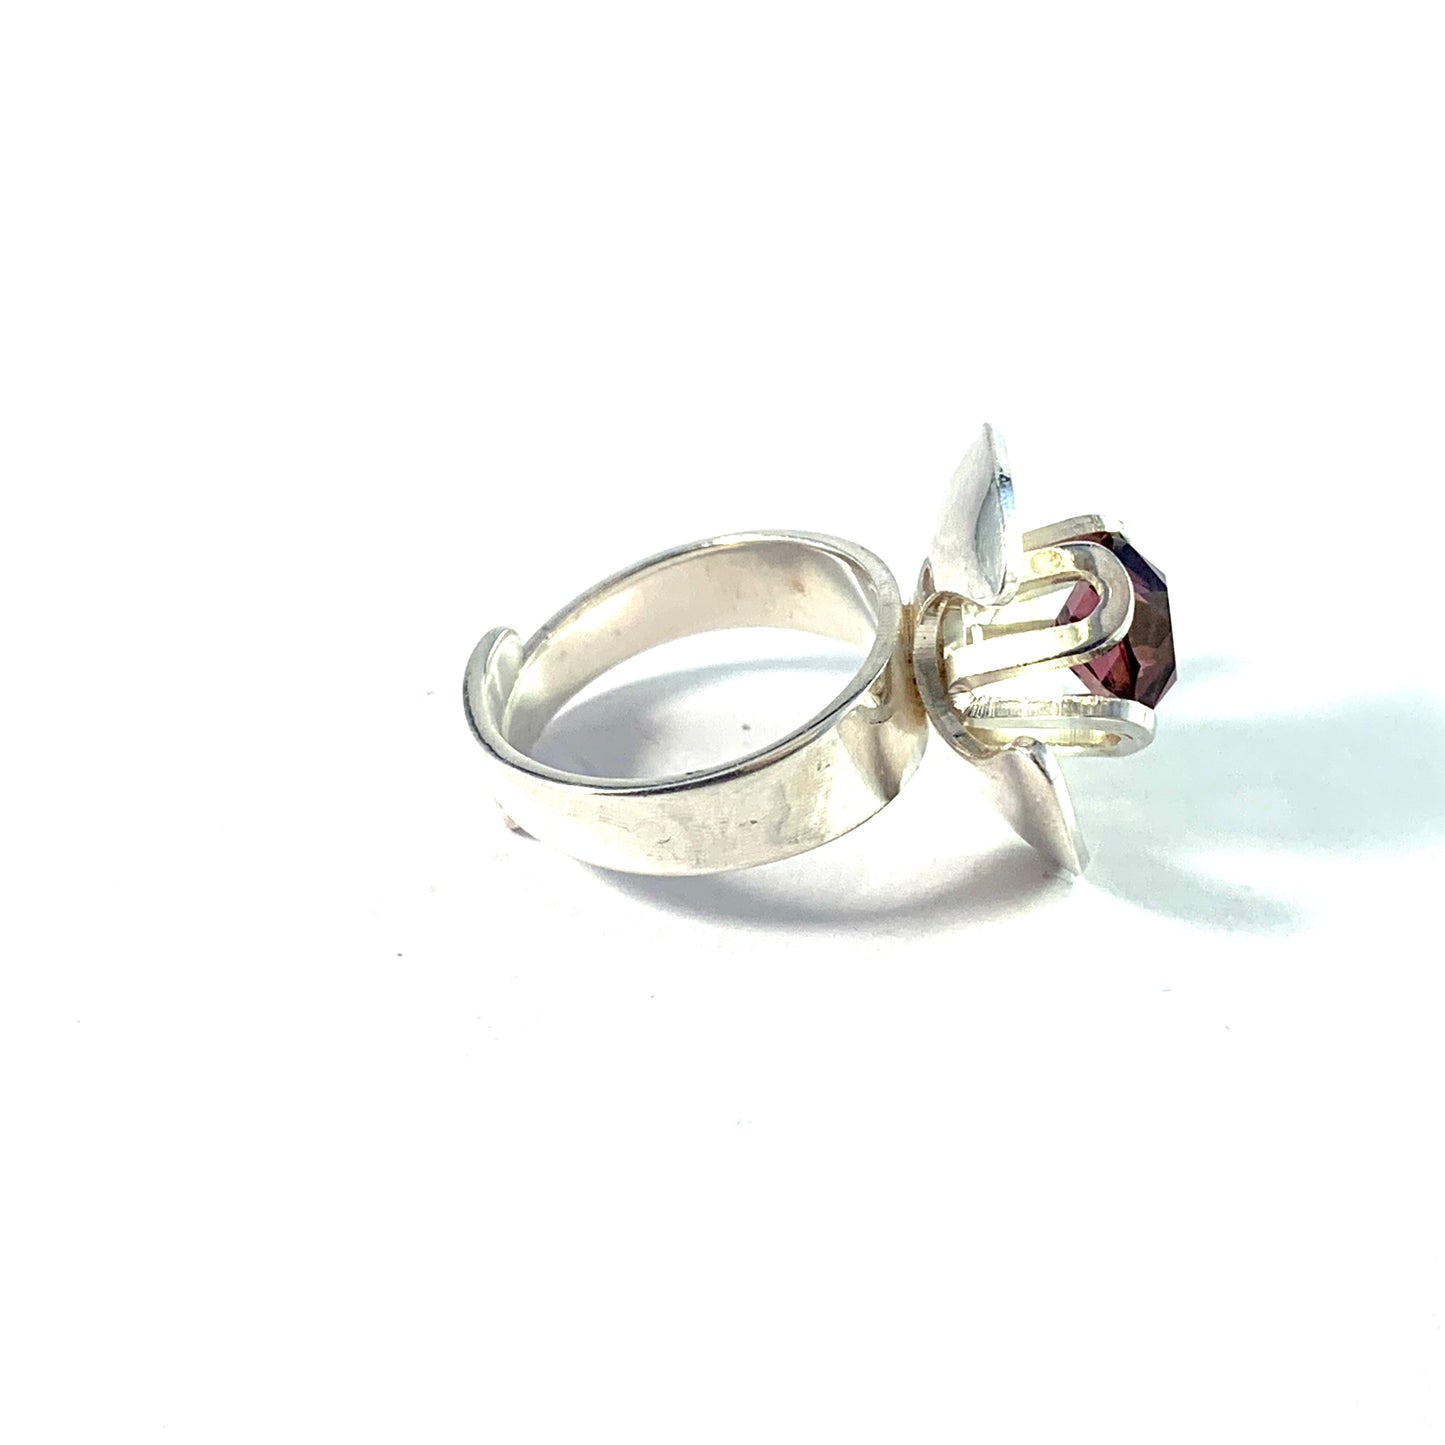 Brofod, Sweden 1975. Sterling Silver Synthetic Purple Stone Modernist Ring.